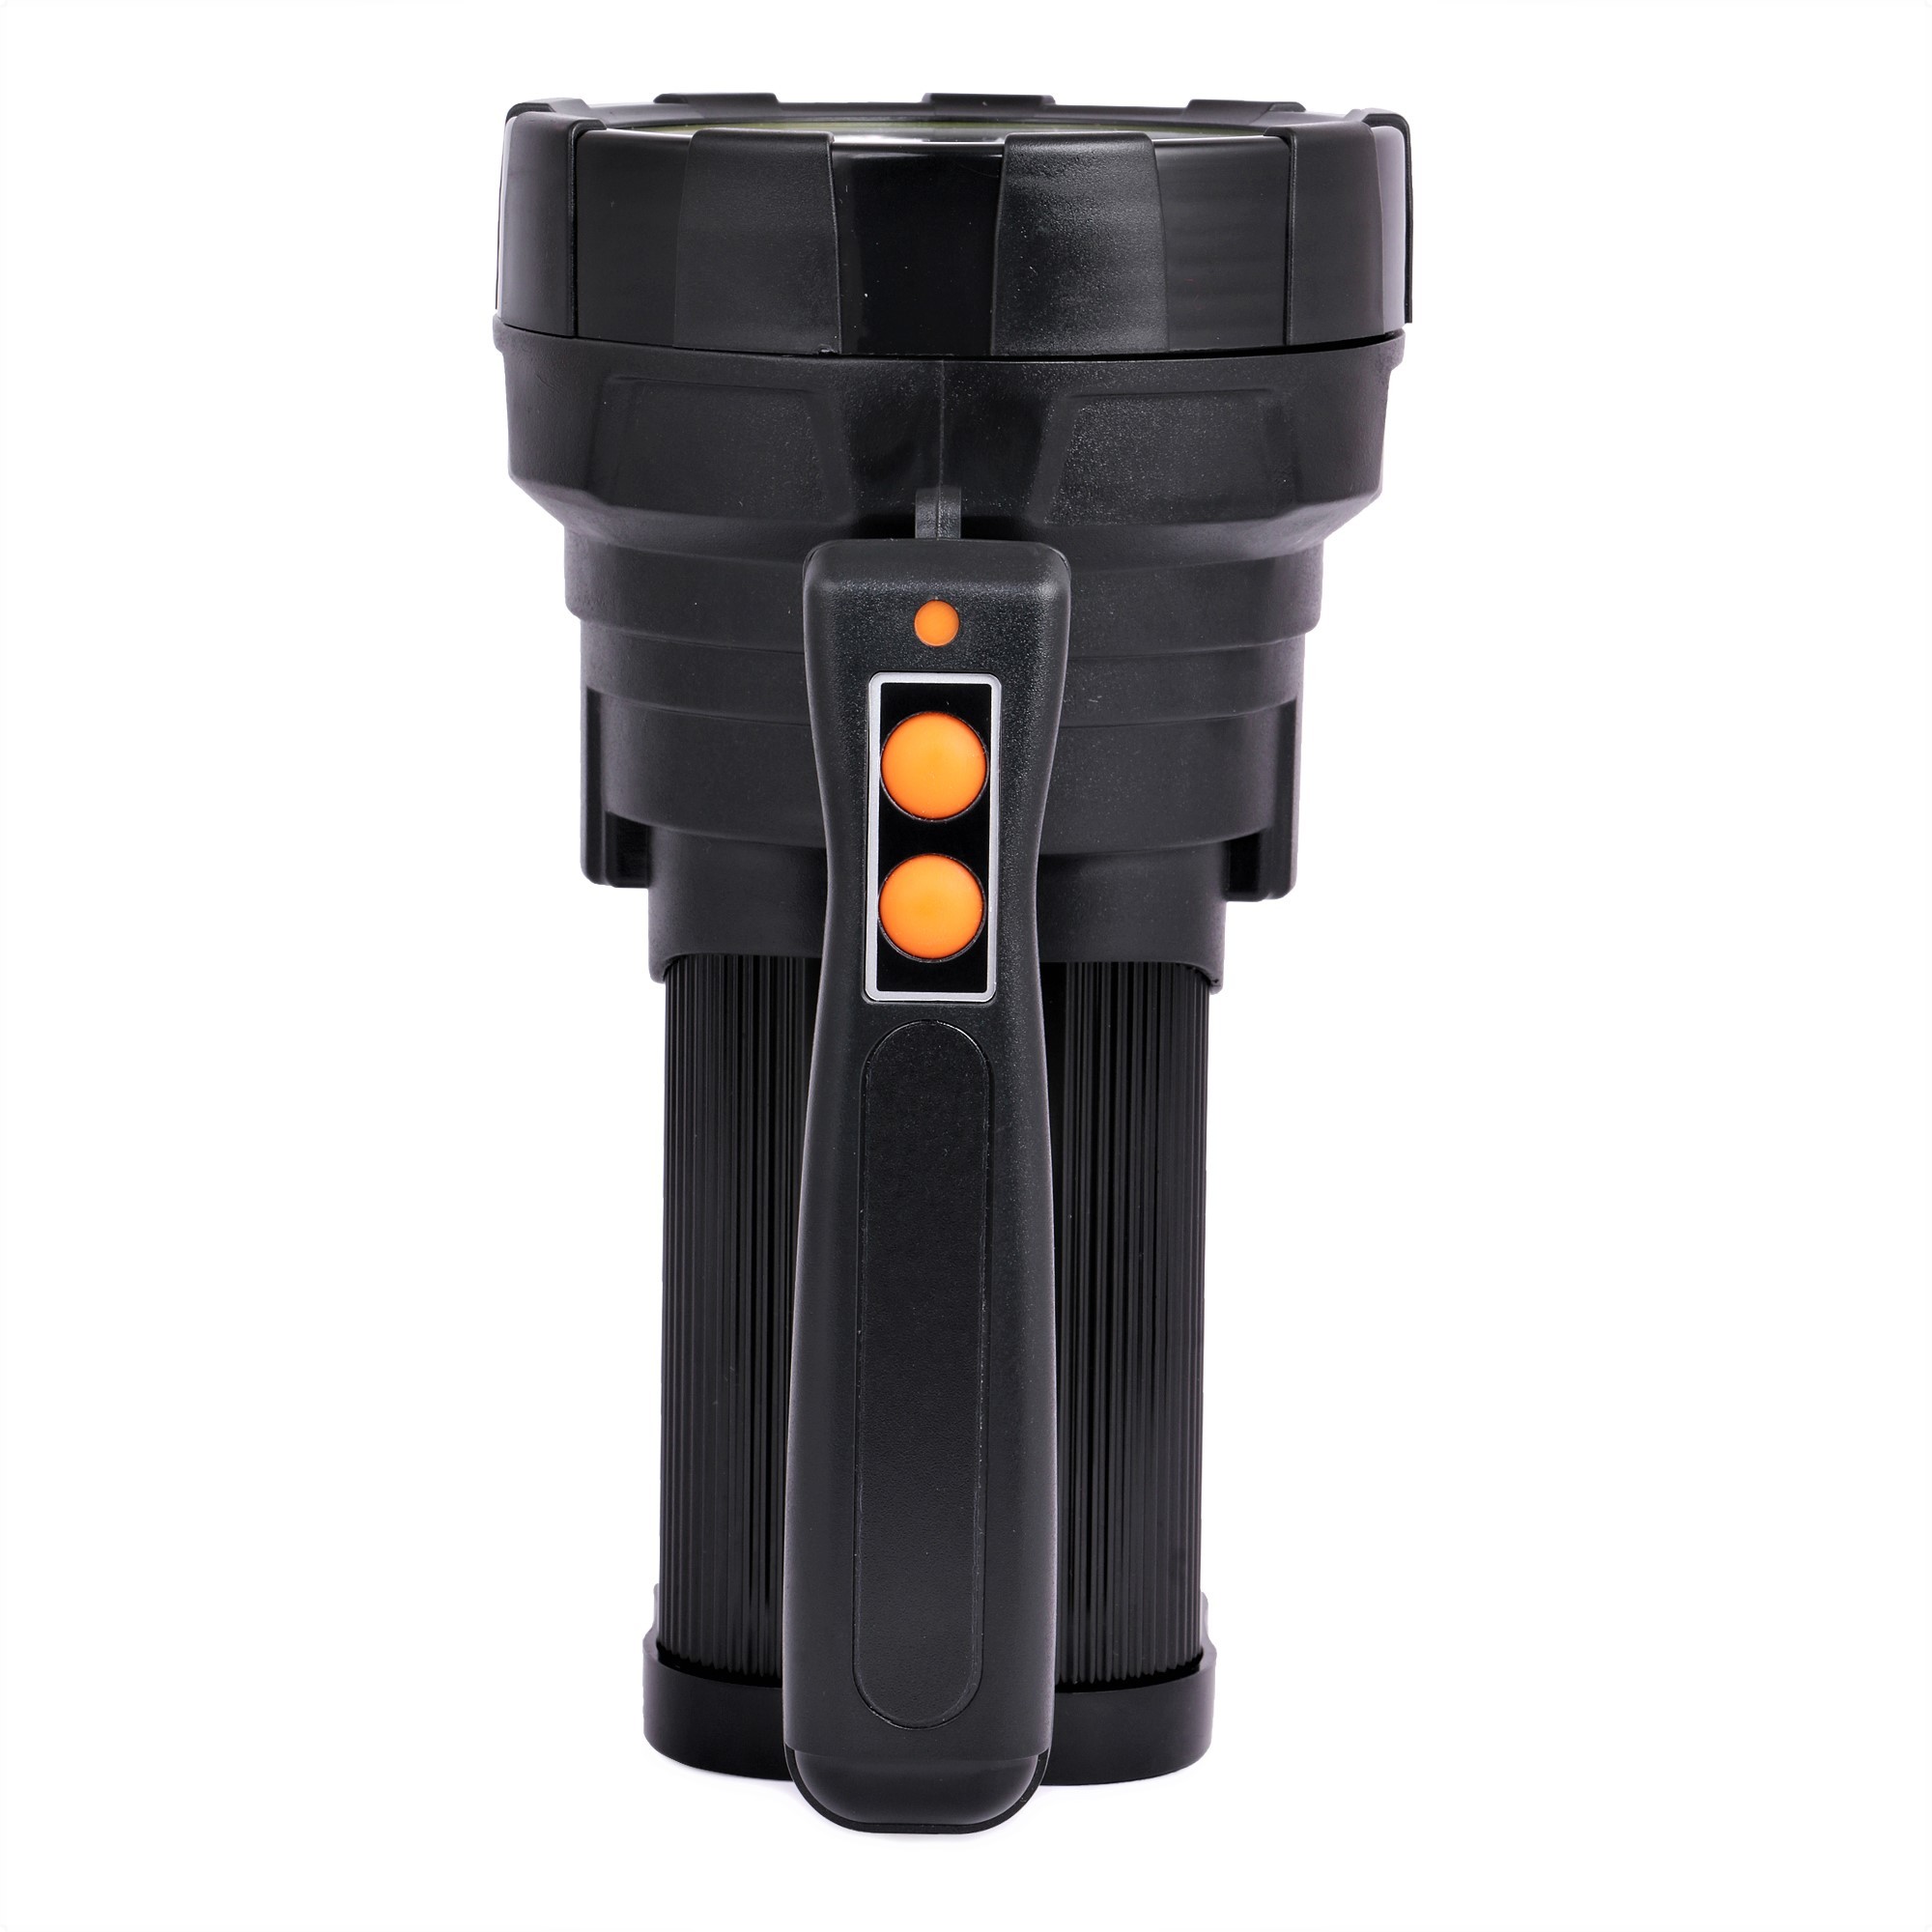 FOS LED Search Light 15W (Range 1 Km.) - Multi-Functional Rechargeable Handheld Torch